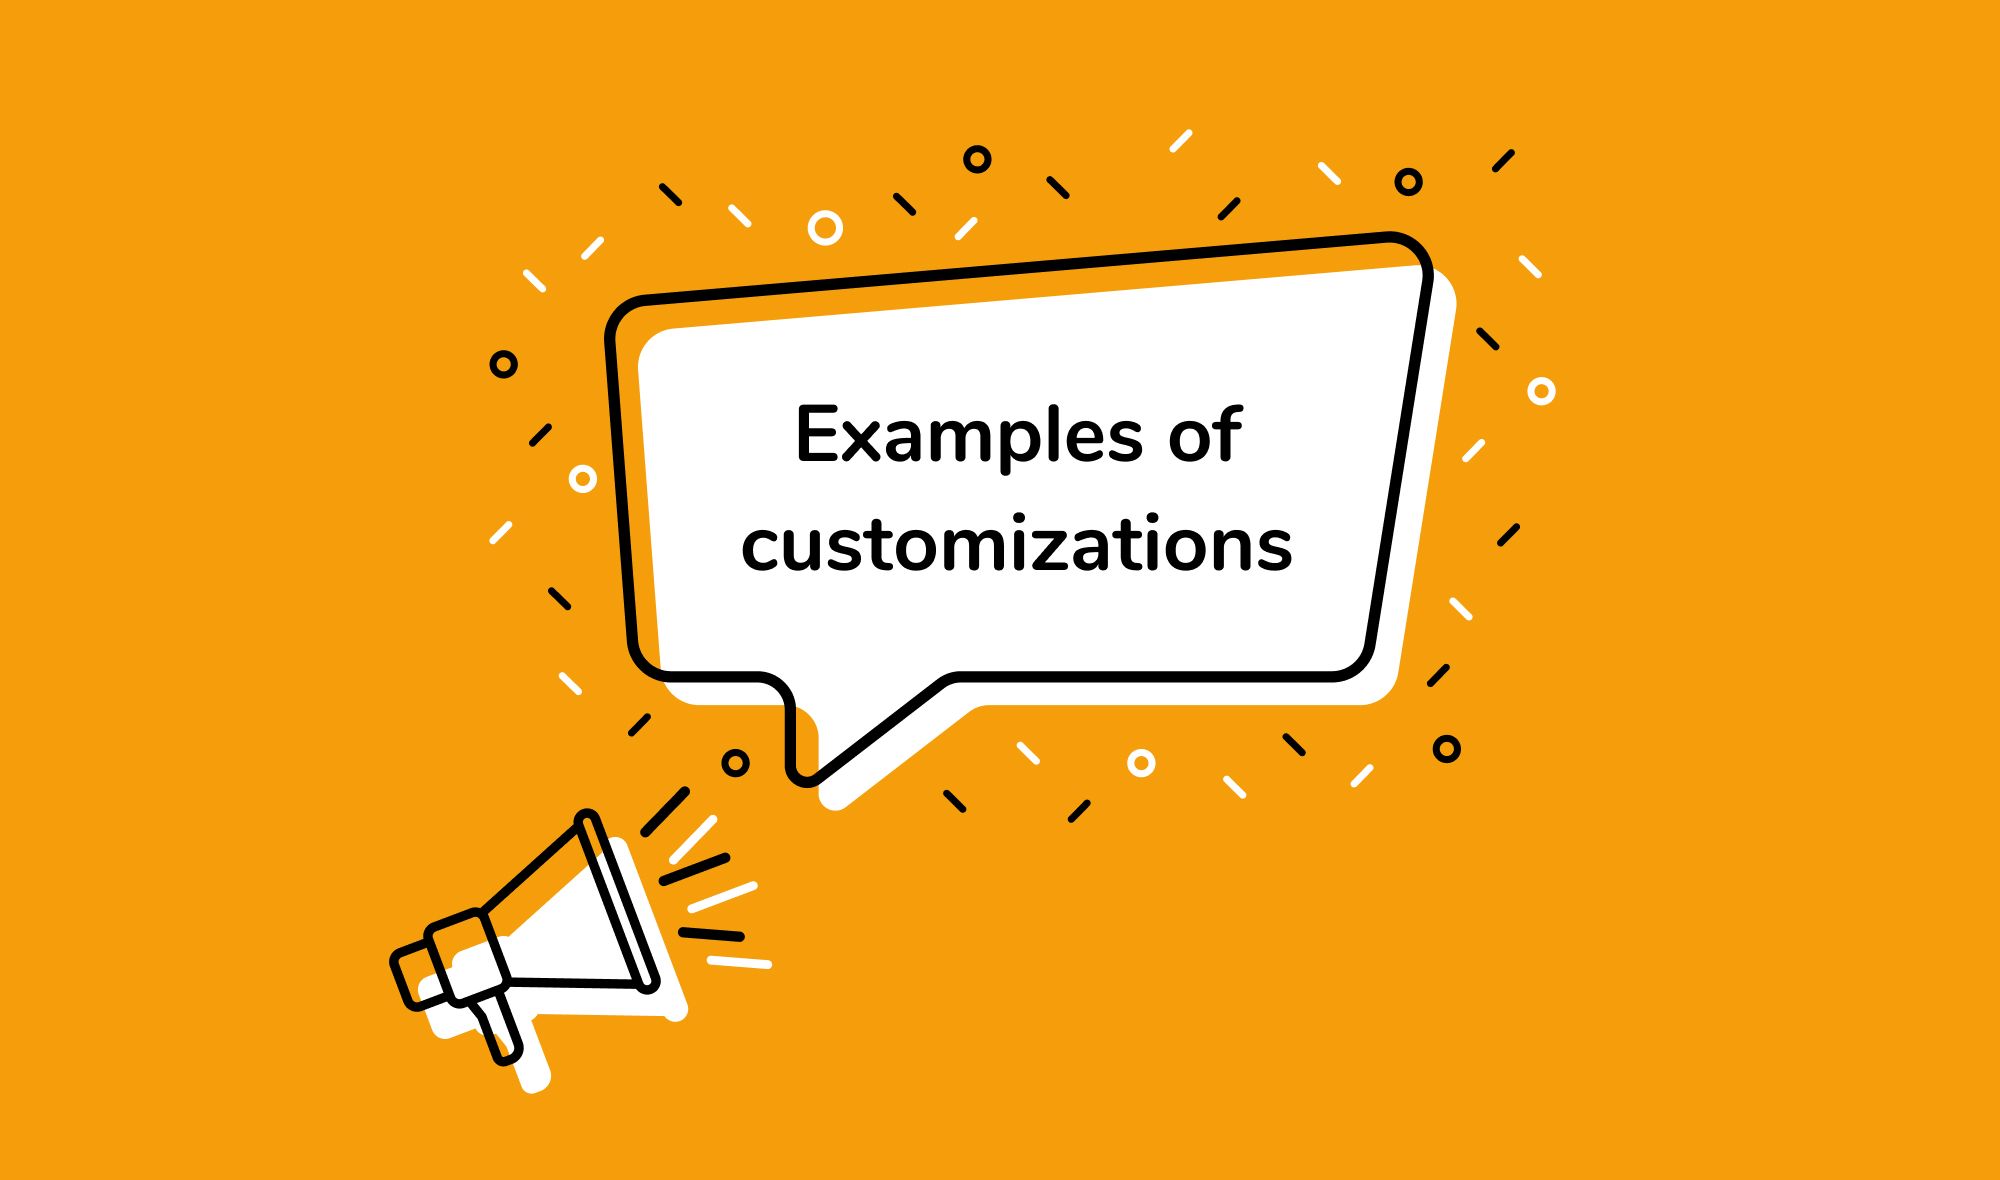 Provide examples of customizations for different types of fences